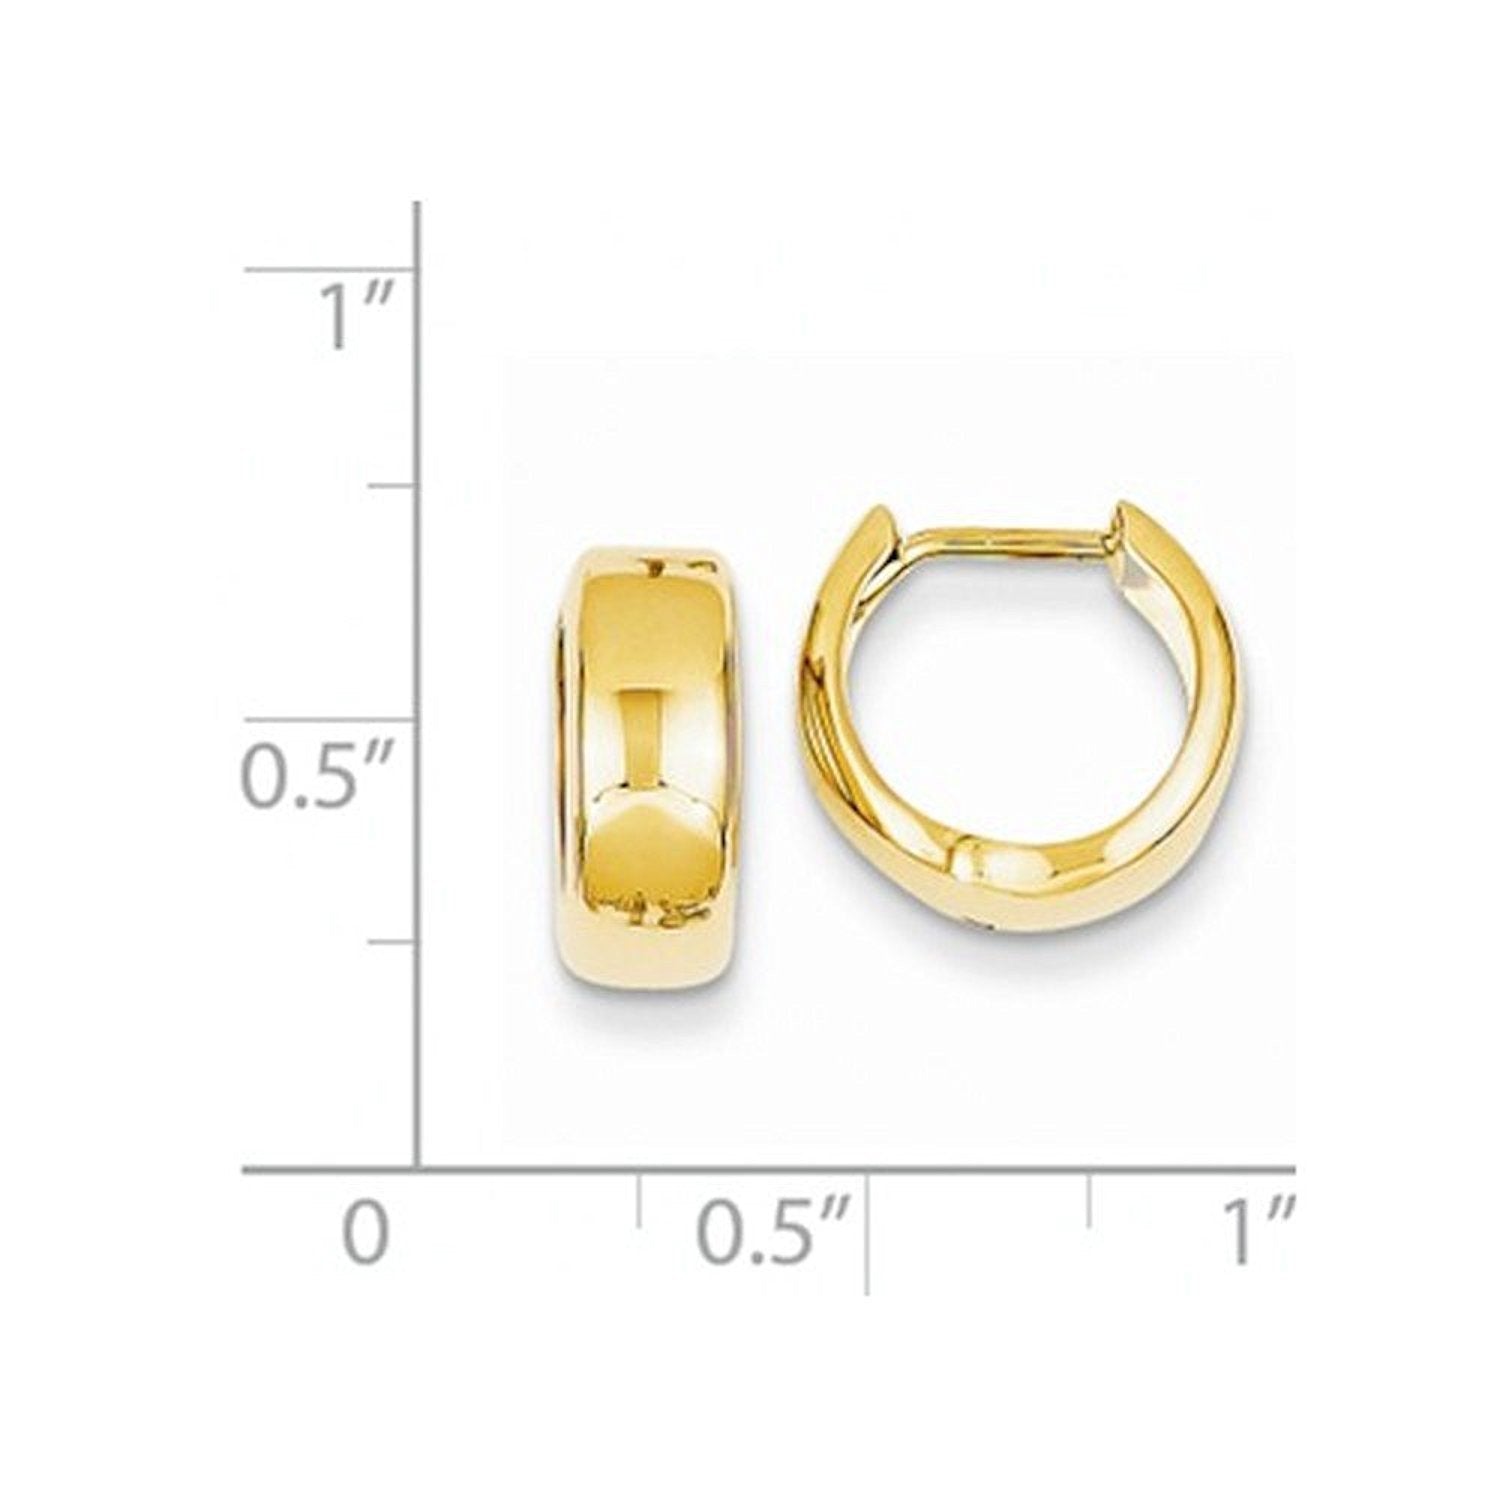 14k Yellow Gold Classic Round Polished Hinged Hoop Huggie Earrings